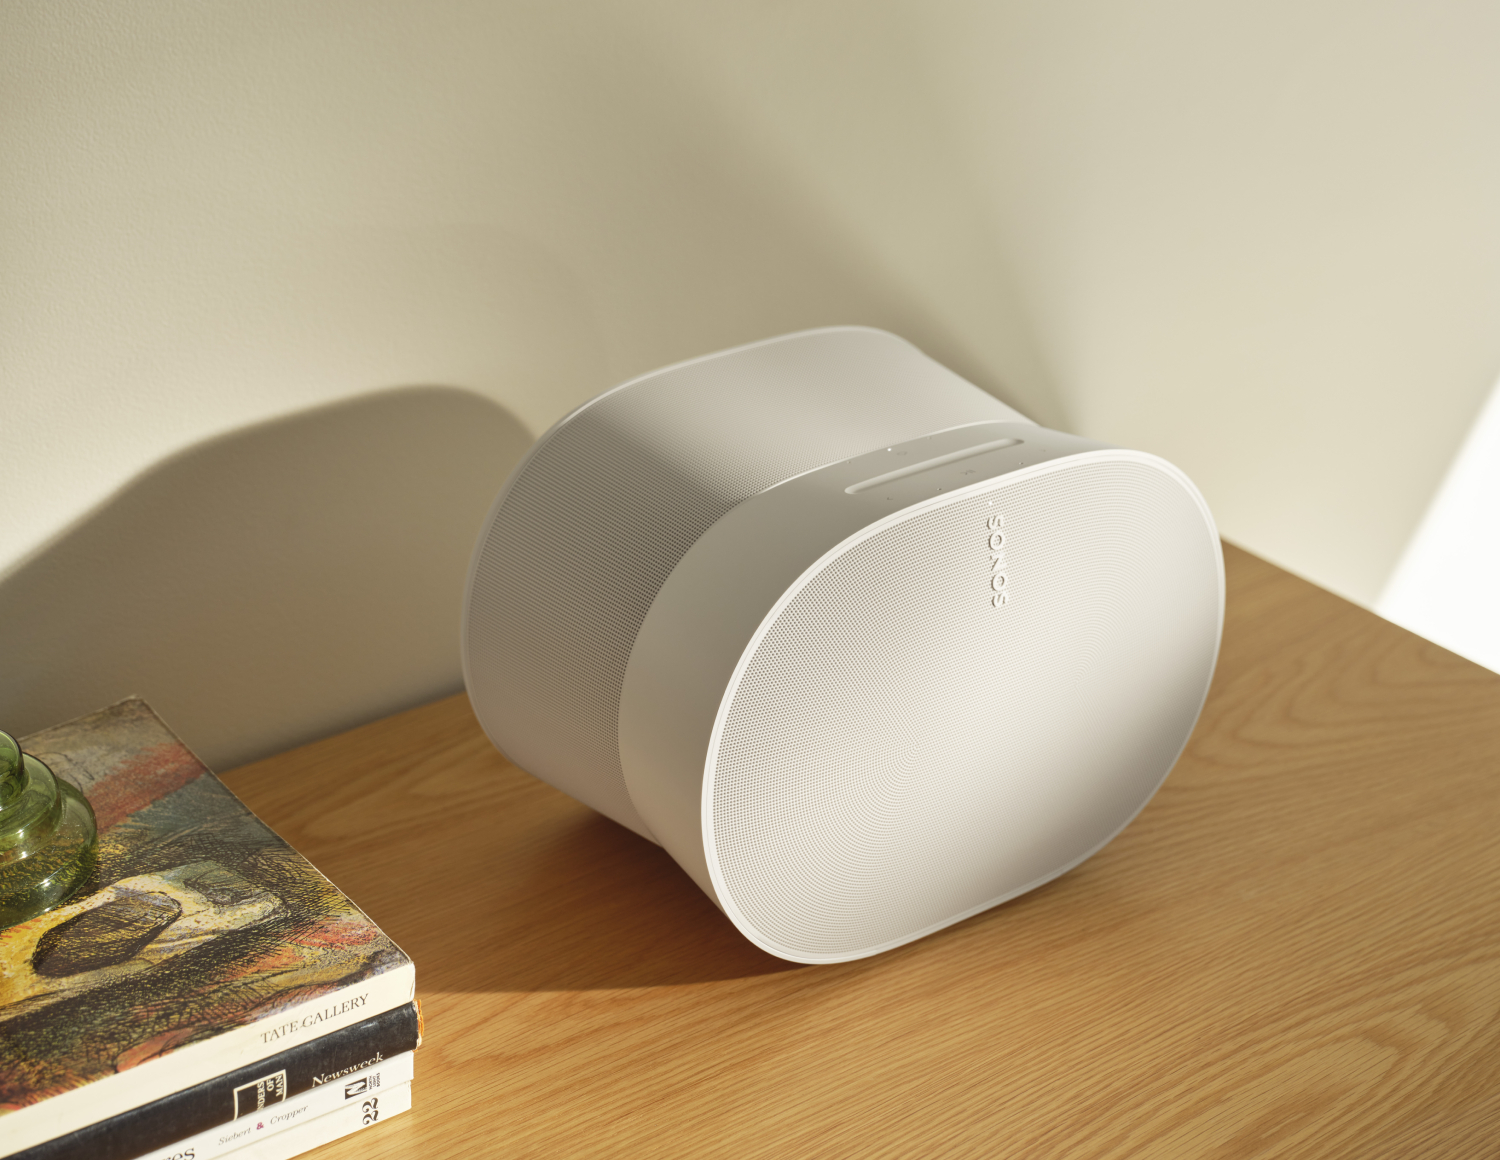 A Sonos 300 speaker in white next to a pile of books.